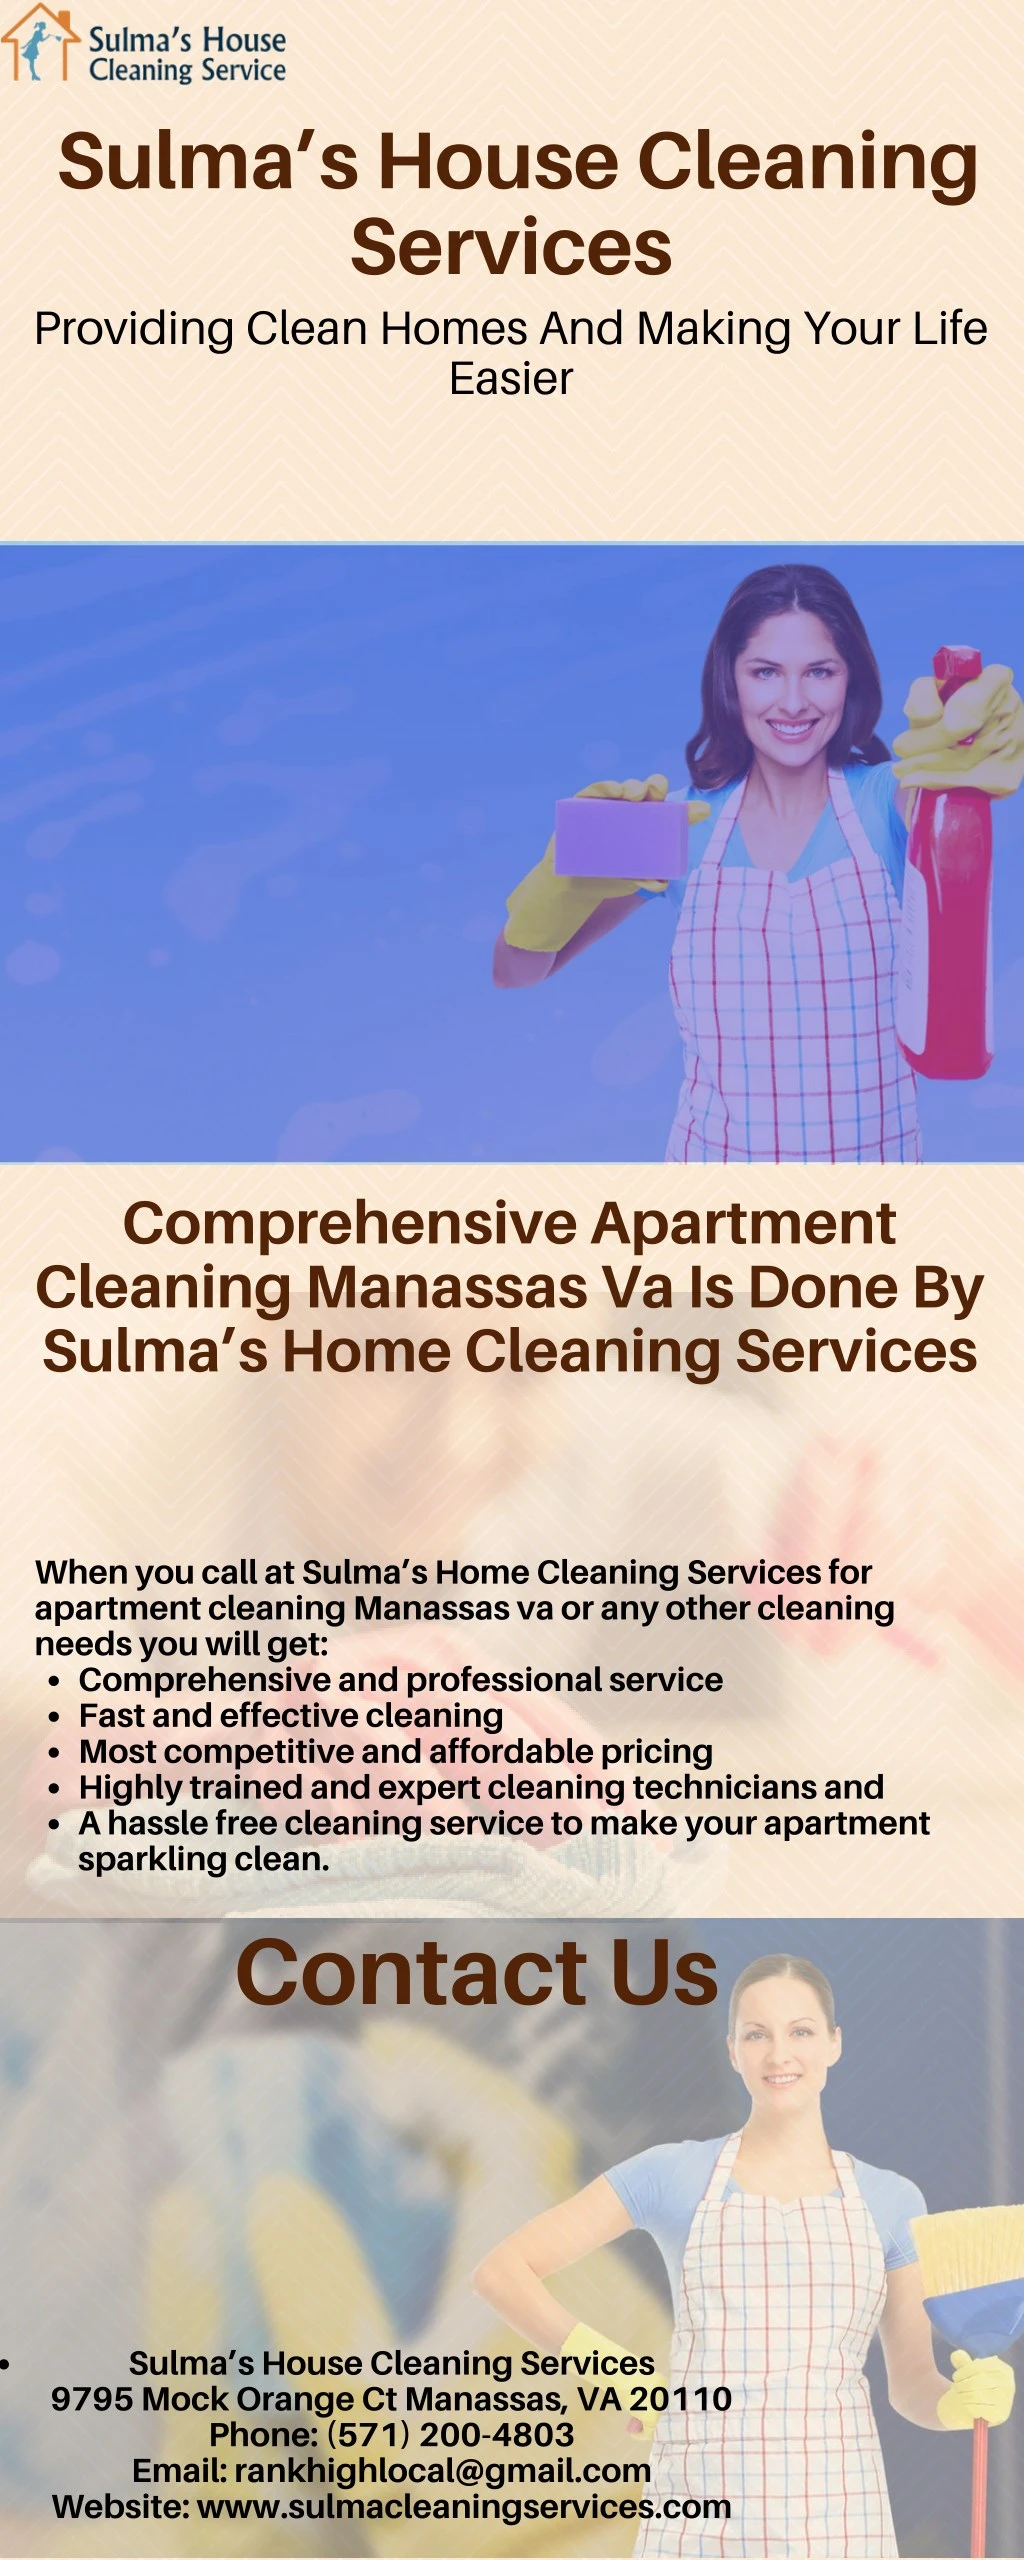 sulma s house cleaning services providing clean